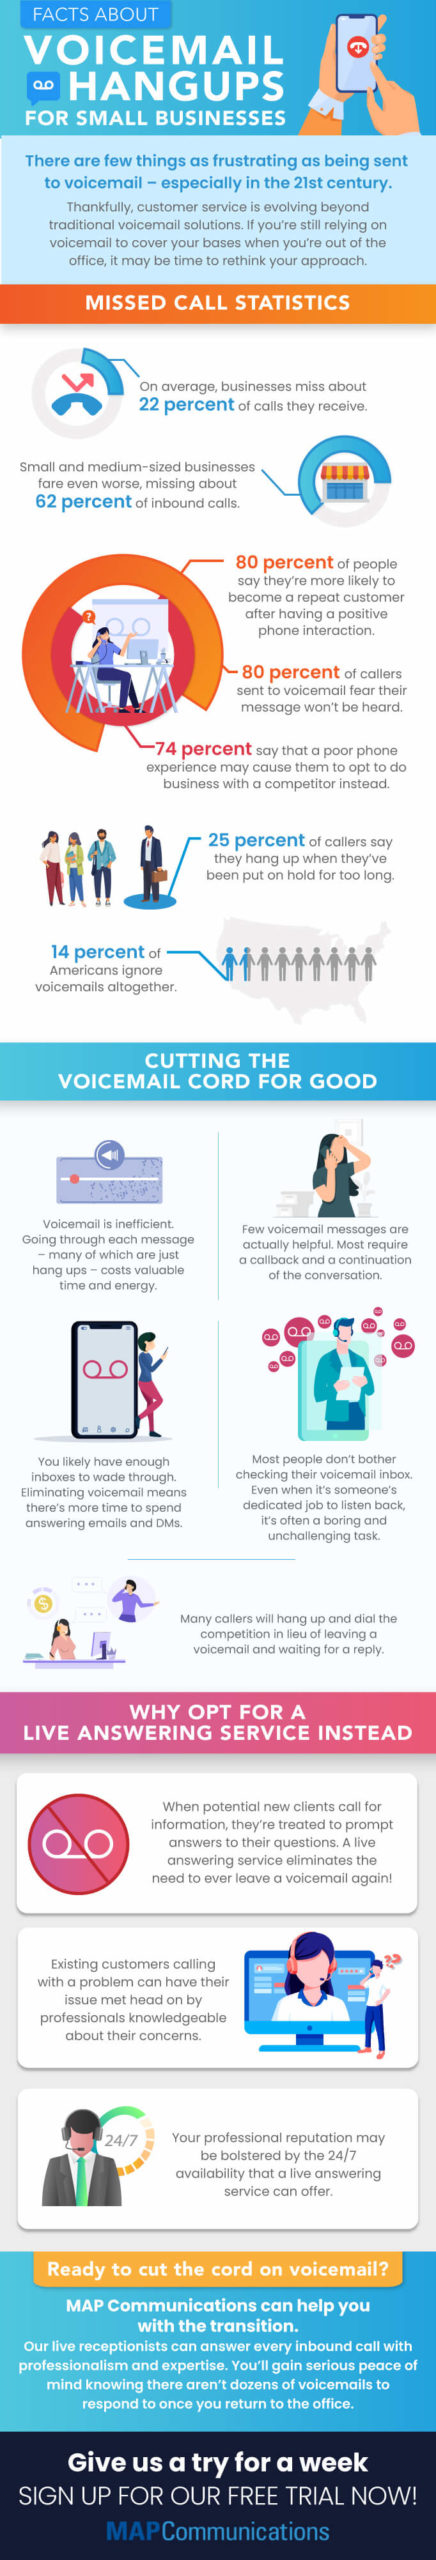 cost of voicemail hangups infographic